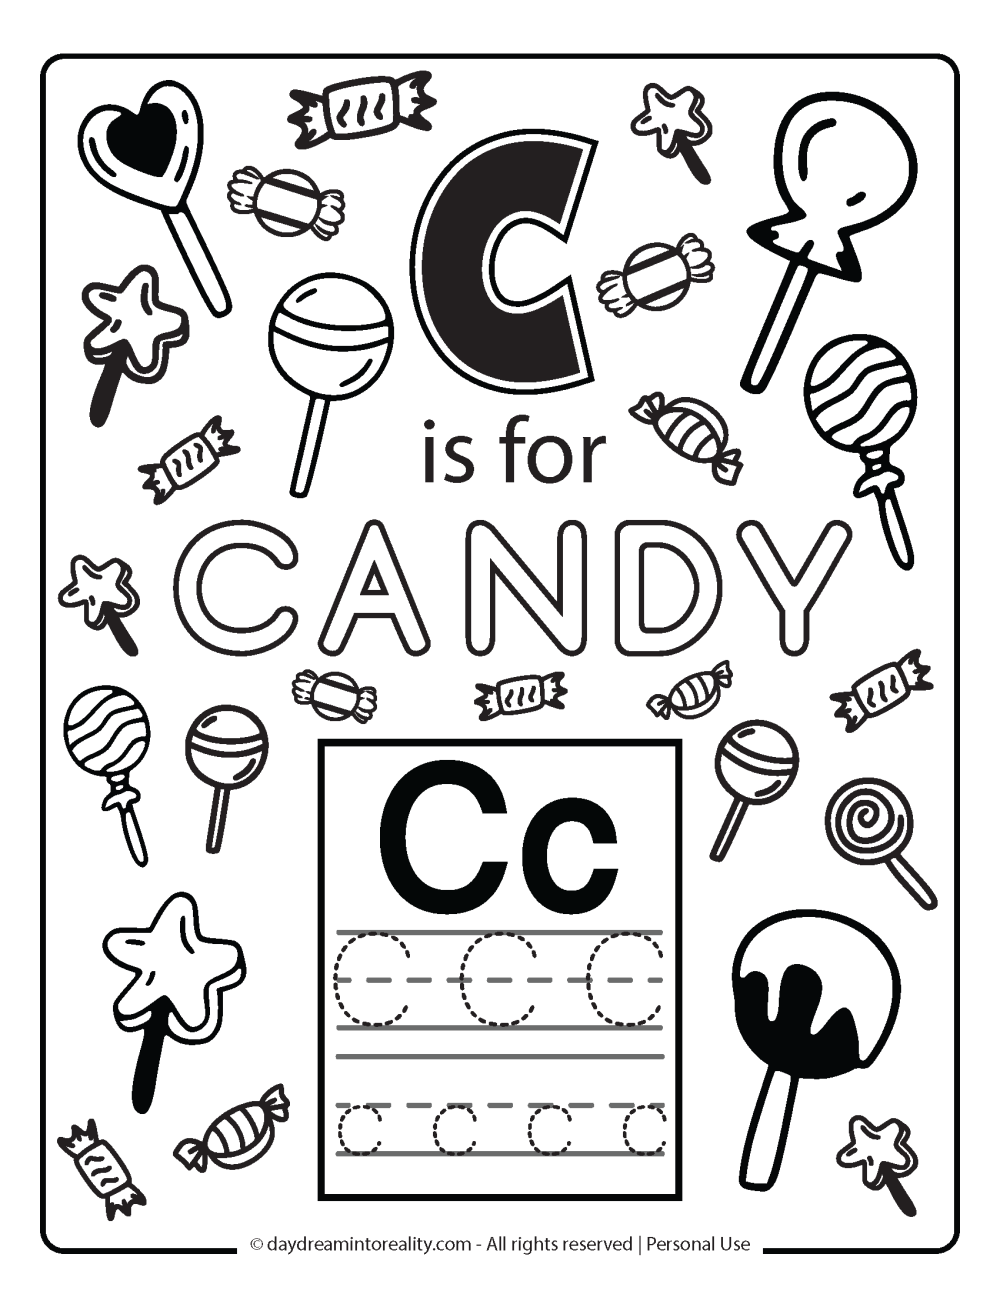 Letter C coloring page free printable - c is for candy